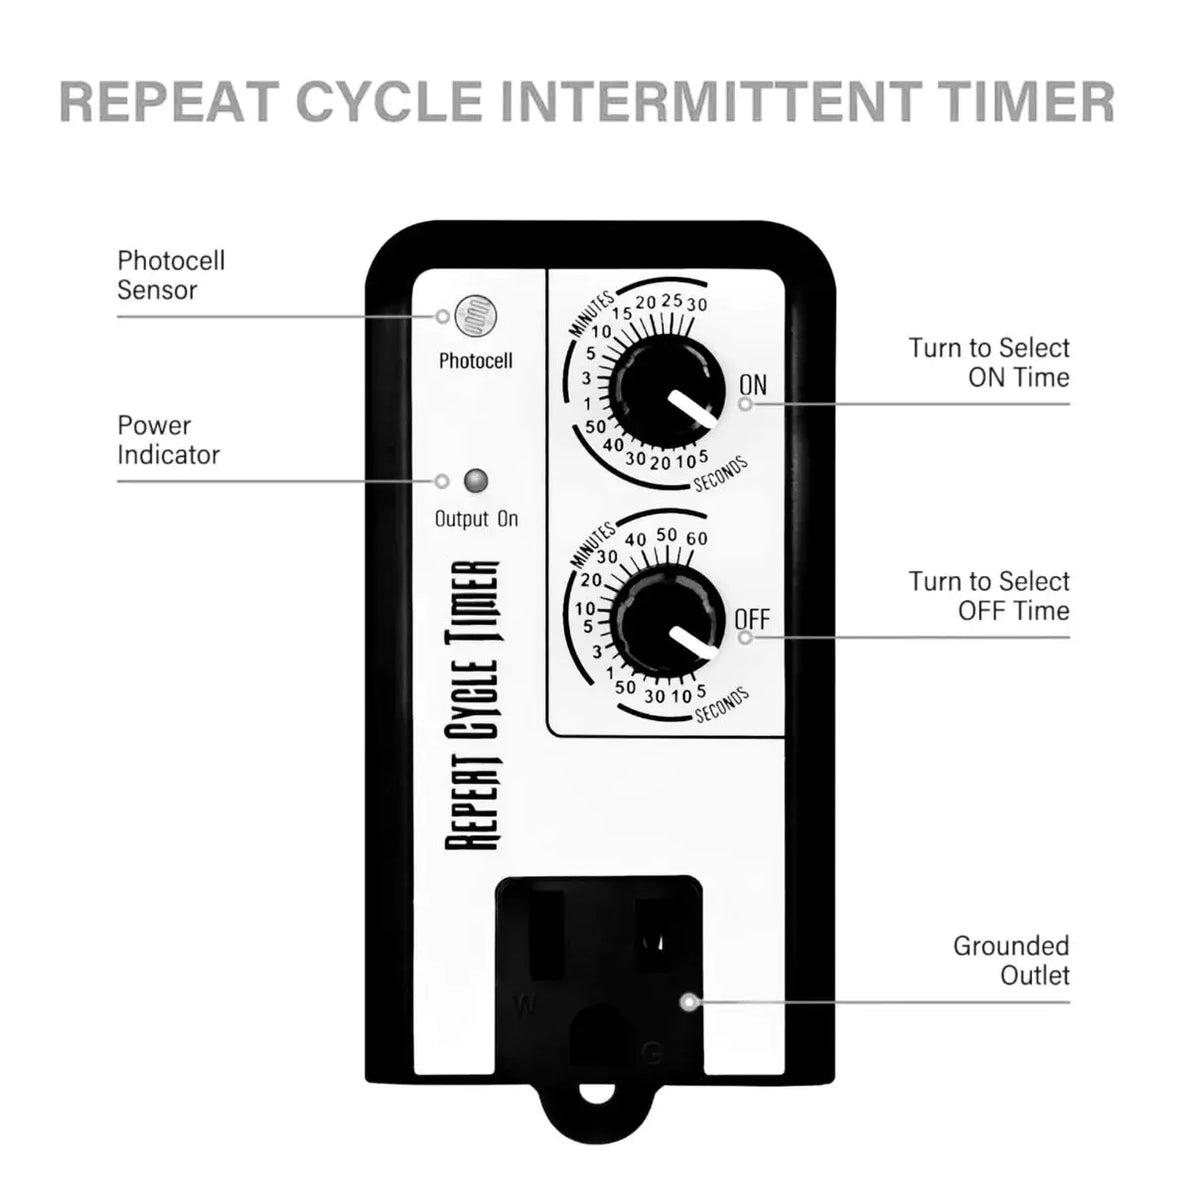 NORTH SPORE Repeat Cycle Timer